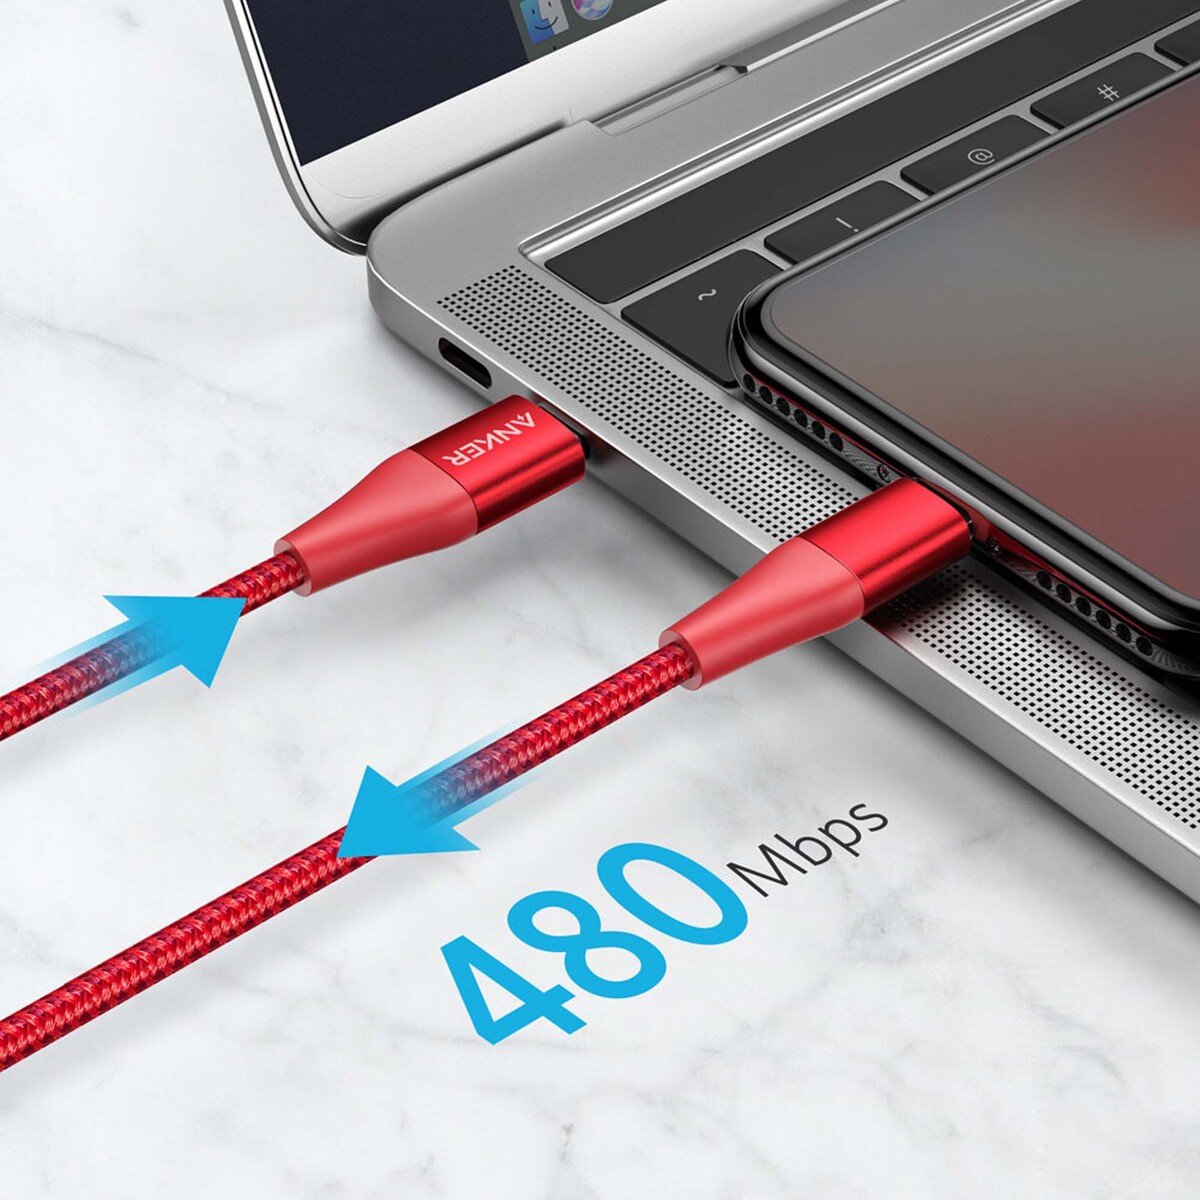 Anker powerline + II USB C cable with lighting connector 3FT Red